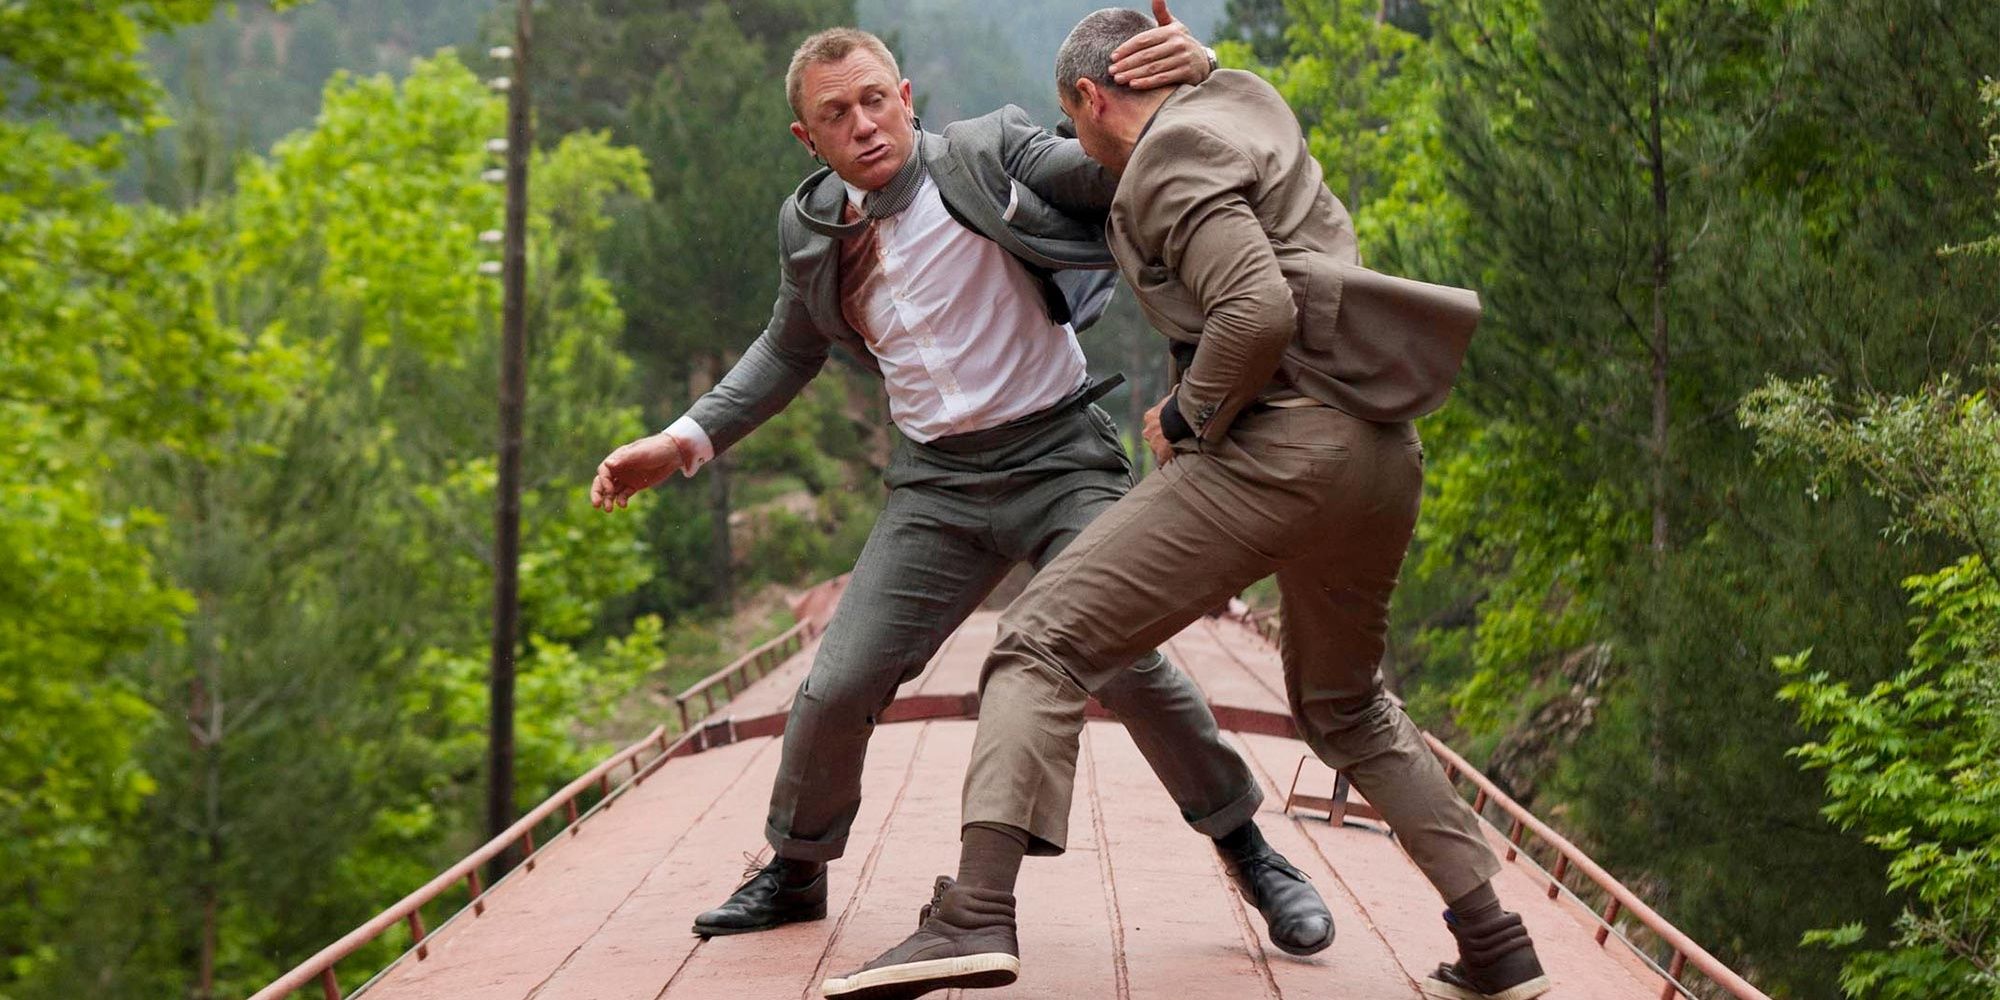 Patrice fights Bond on top of a train in Skyfall